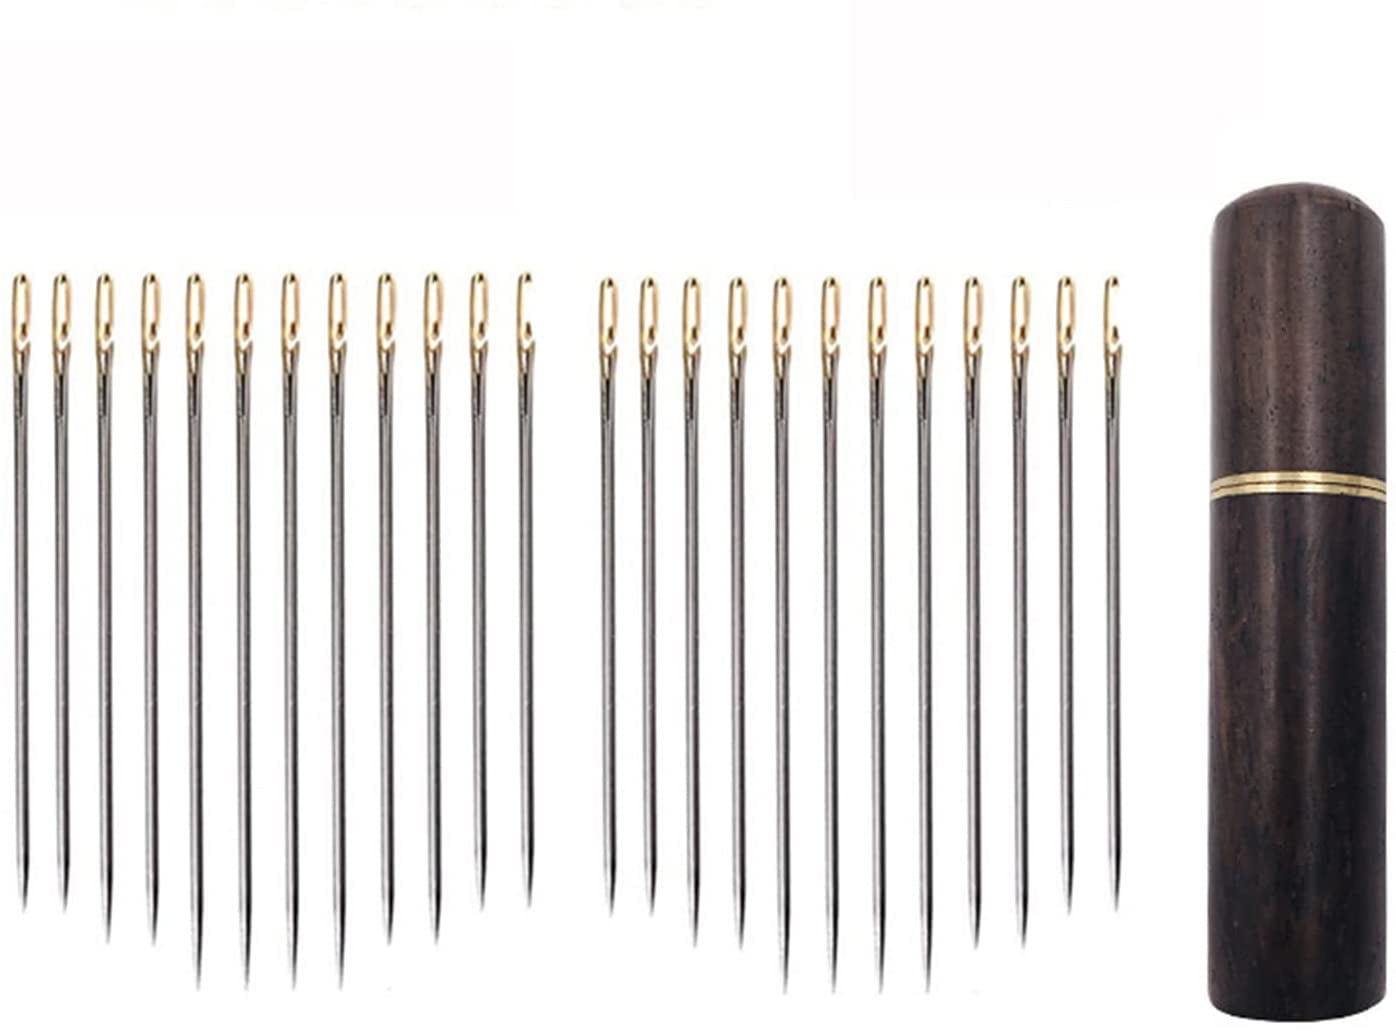 30pcs/set Self Threading Needles Easy Threading Needles With Wooden Needle  Case For Storing Handmade Sewing Embroidery Needle